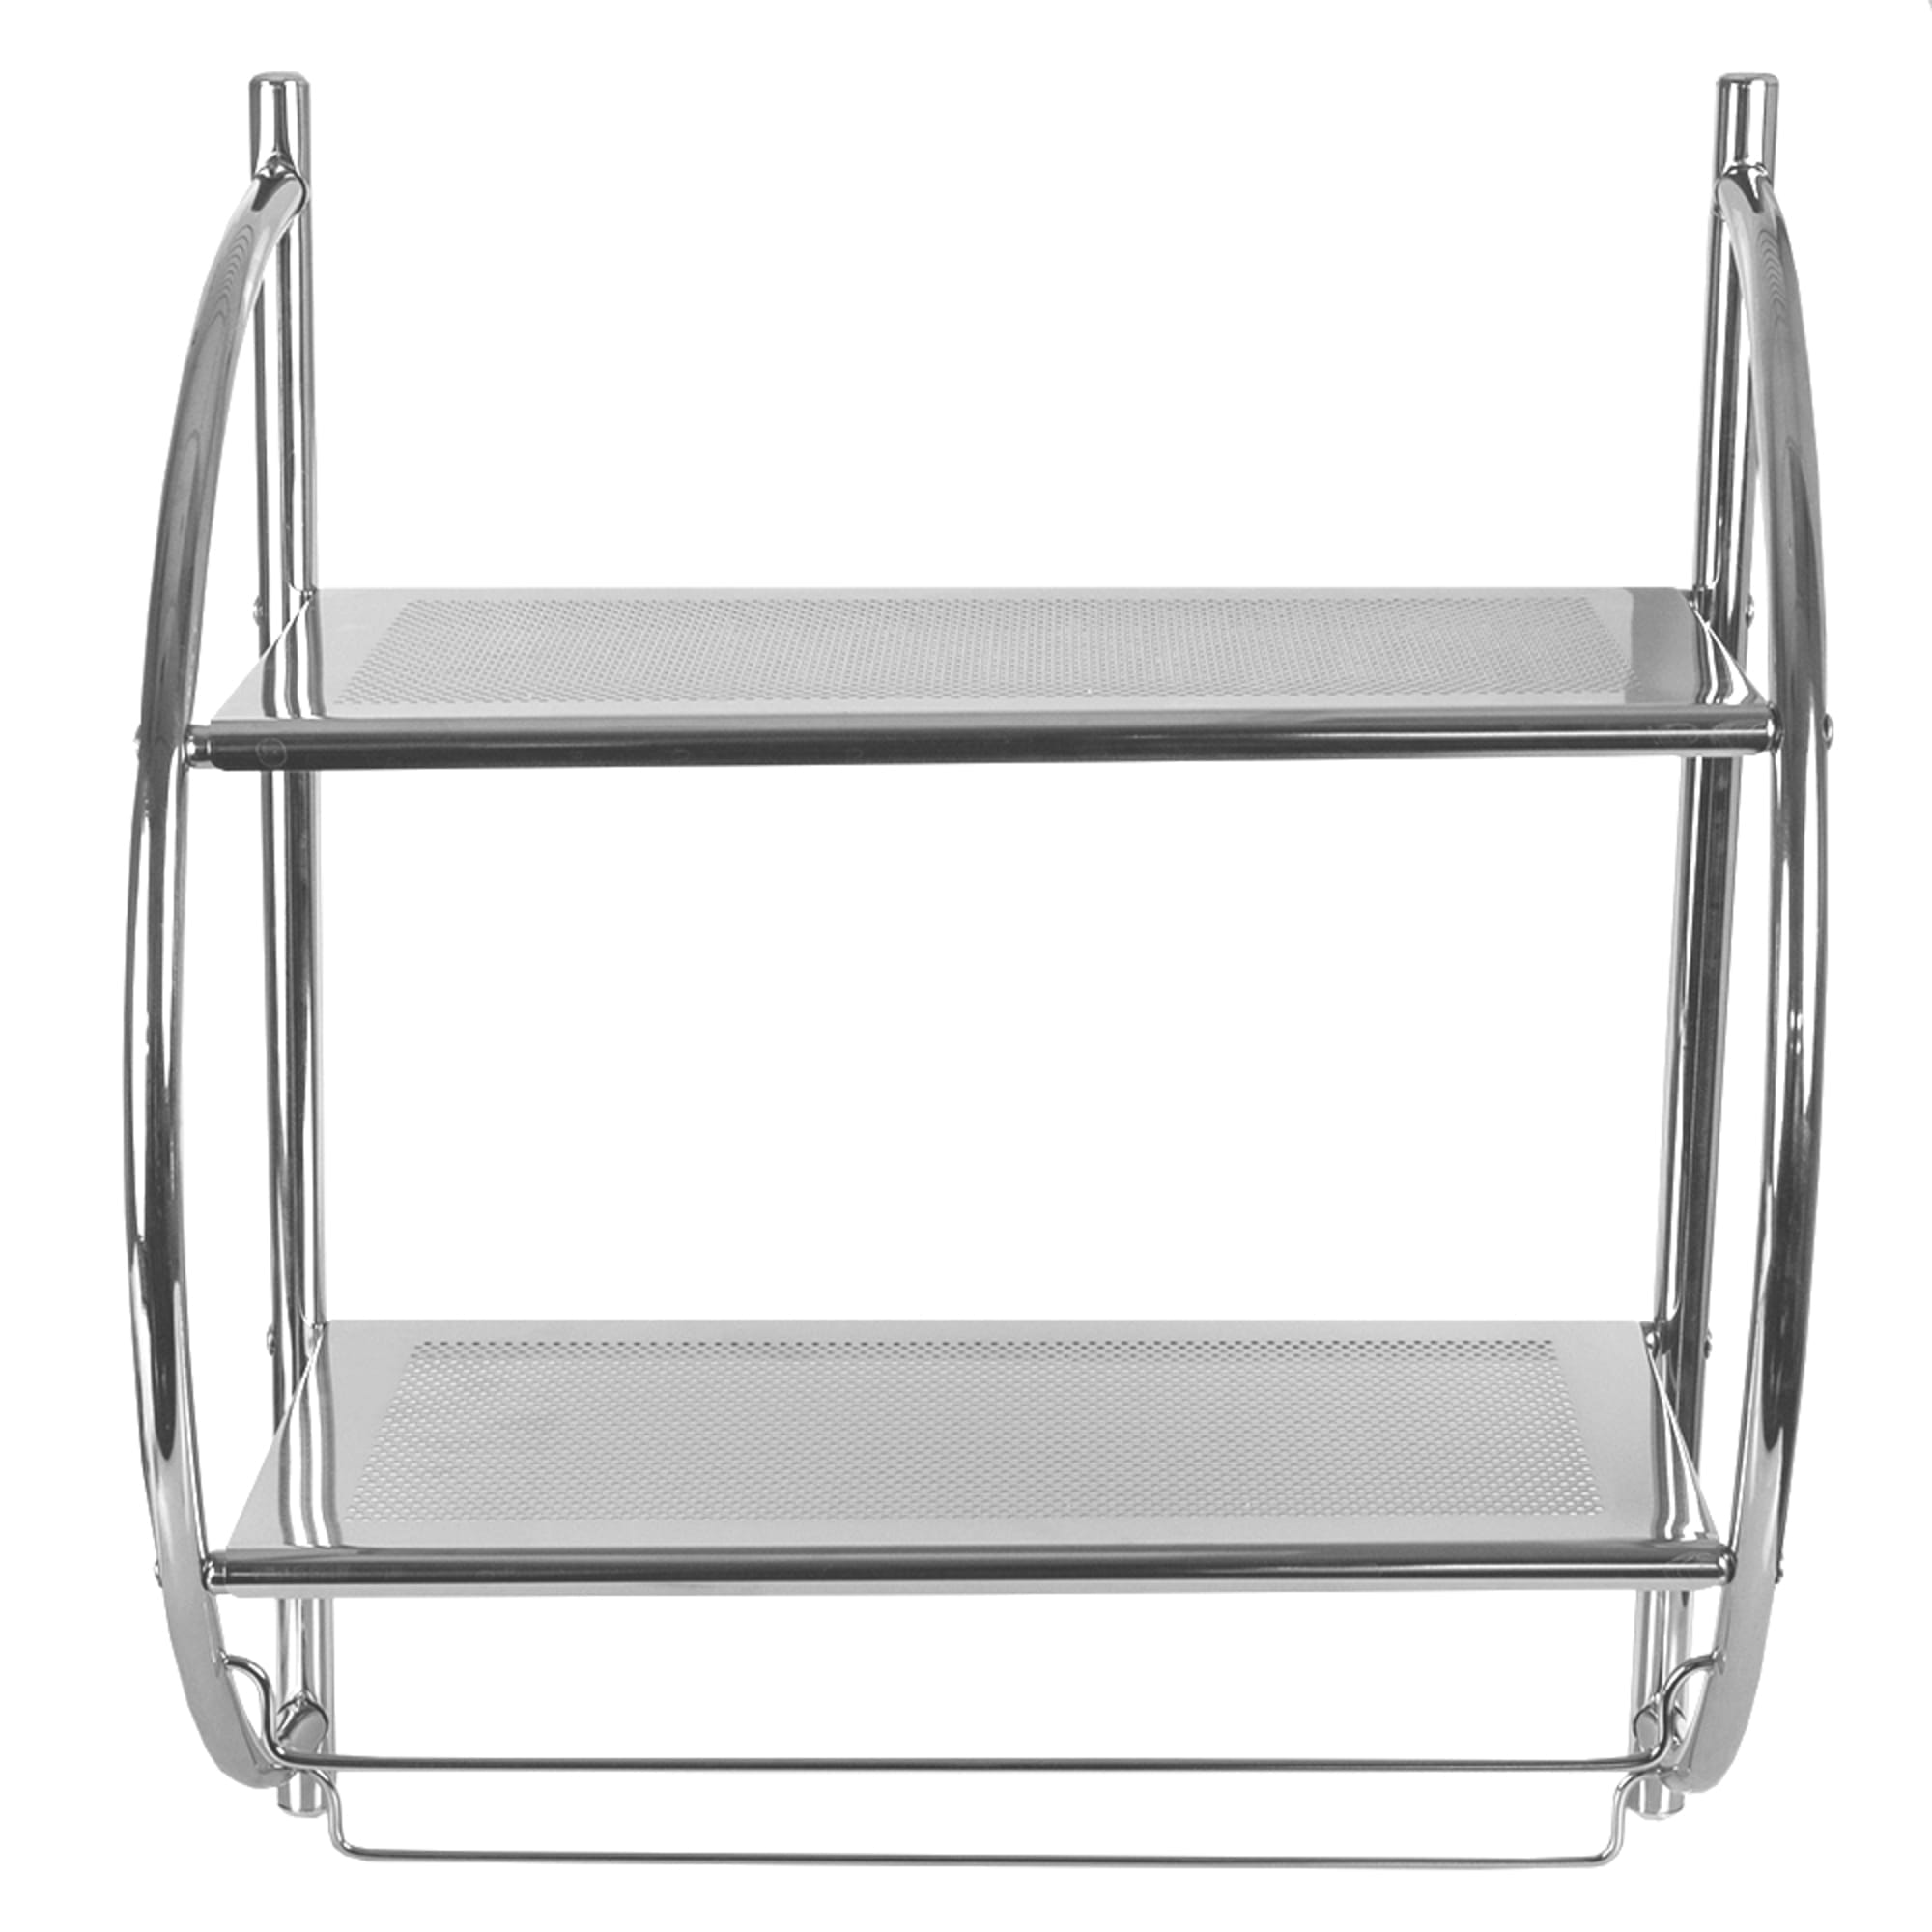 Home Basics 2 Tier Wall Mounting Chrome Plated Steel Bathroom Shelf with Towel Bar $20.00 EACH, CASE PACK OF 6